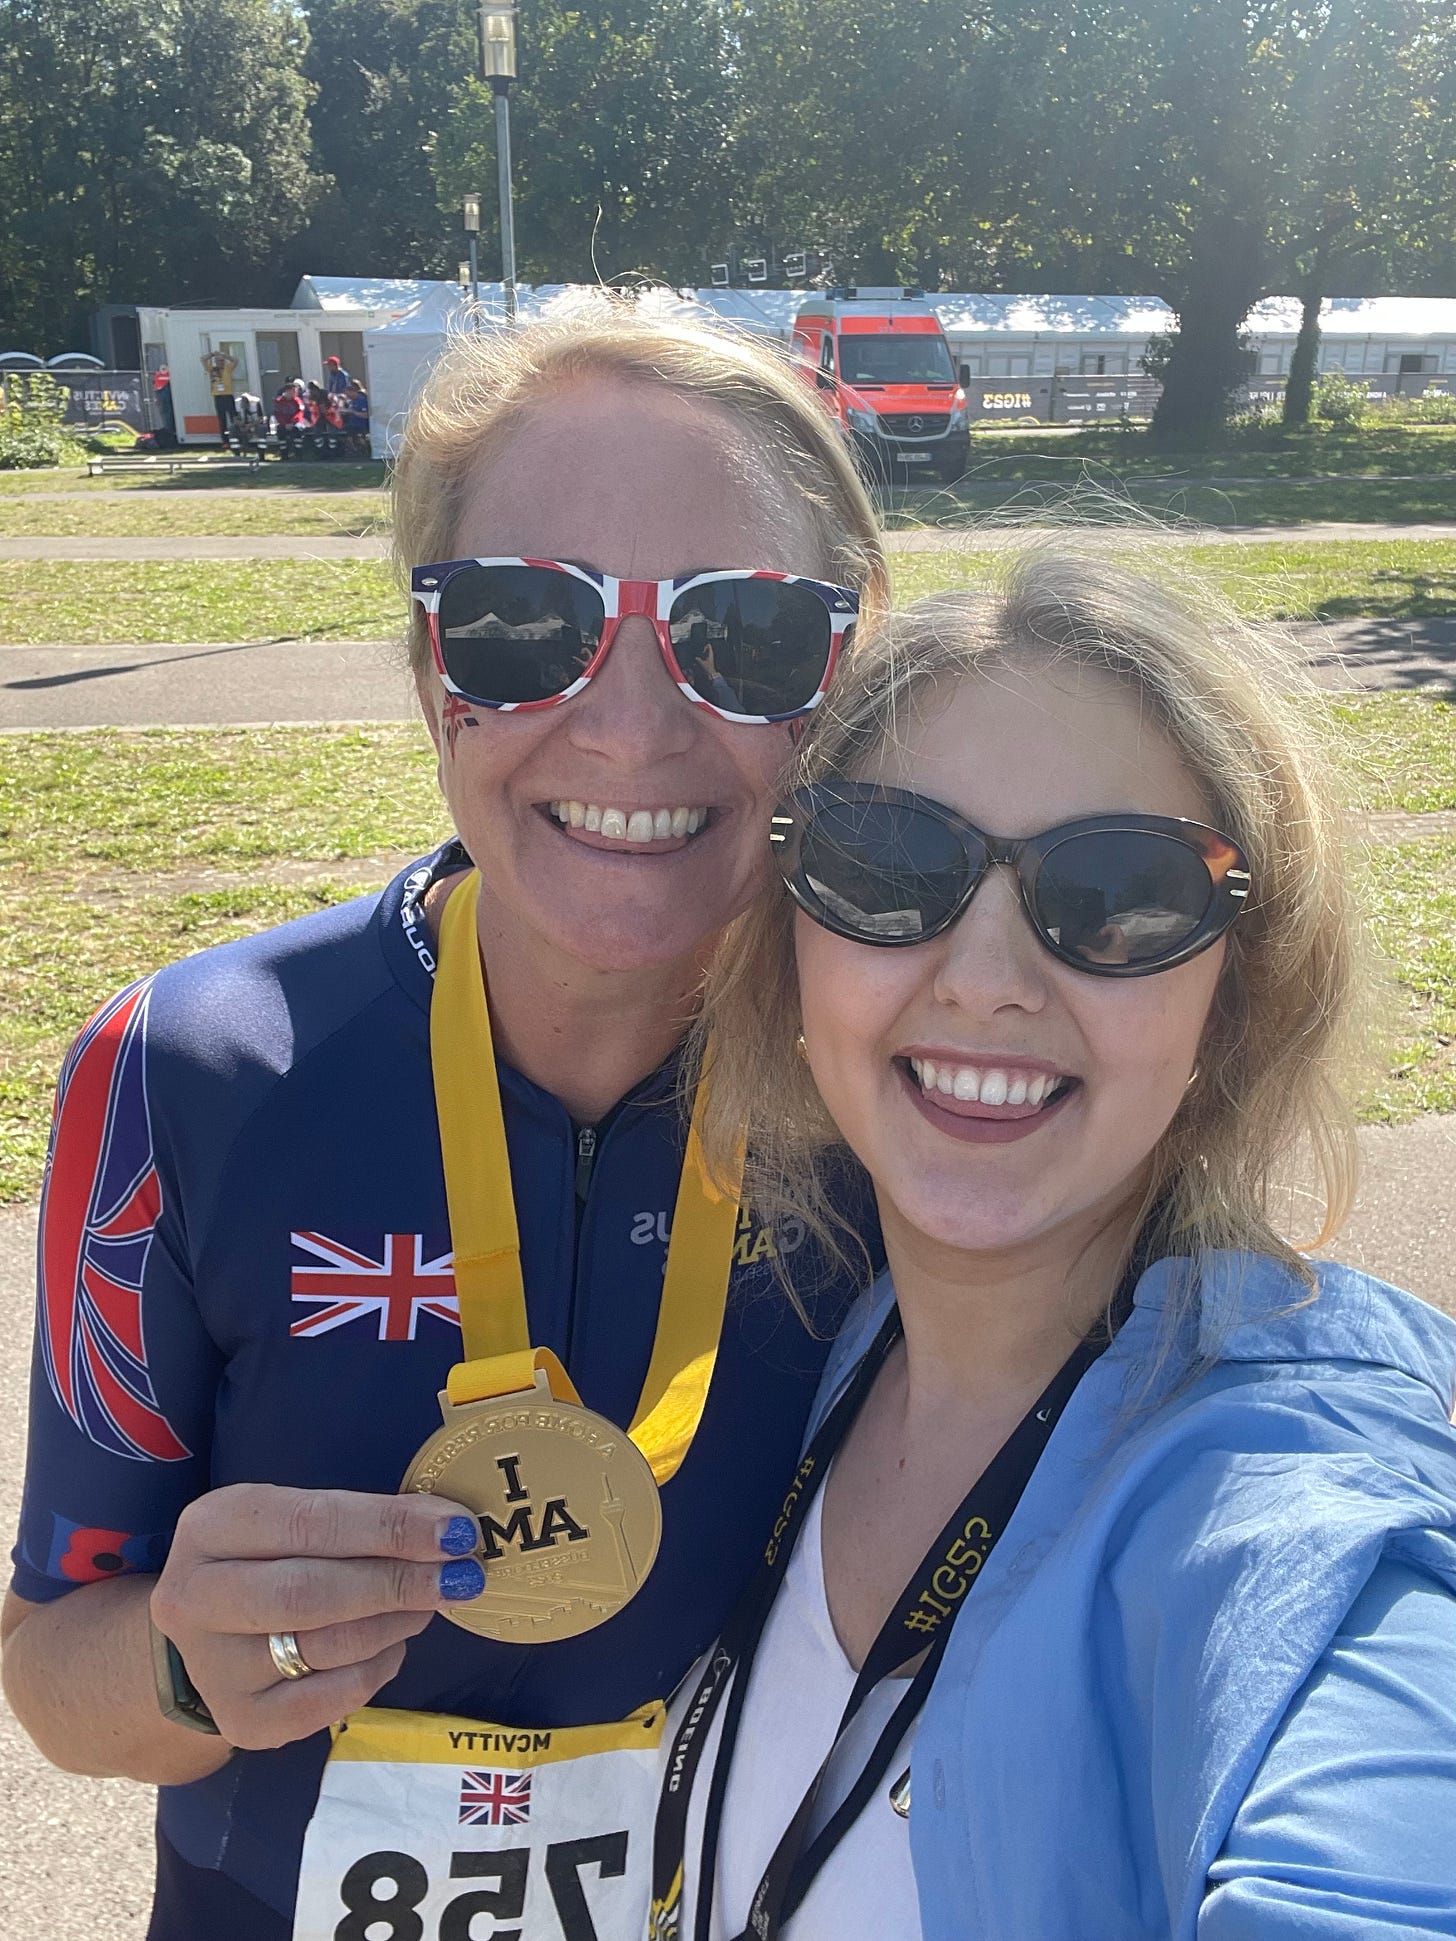 Isabelle Casey in Dusseldorf with smiling Invictus Games competitor